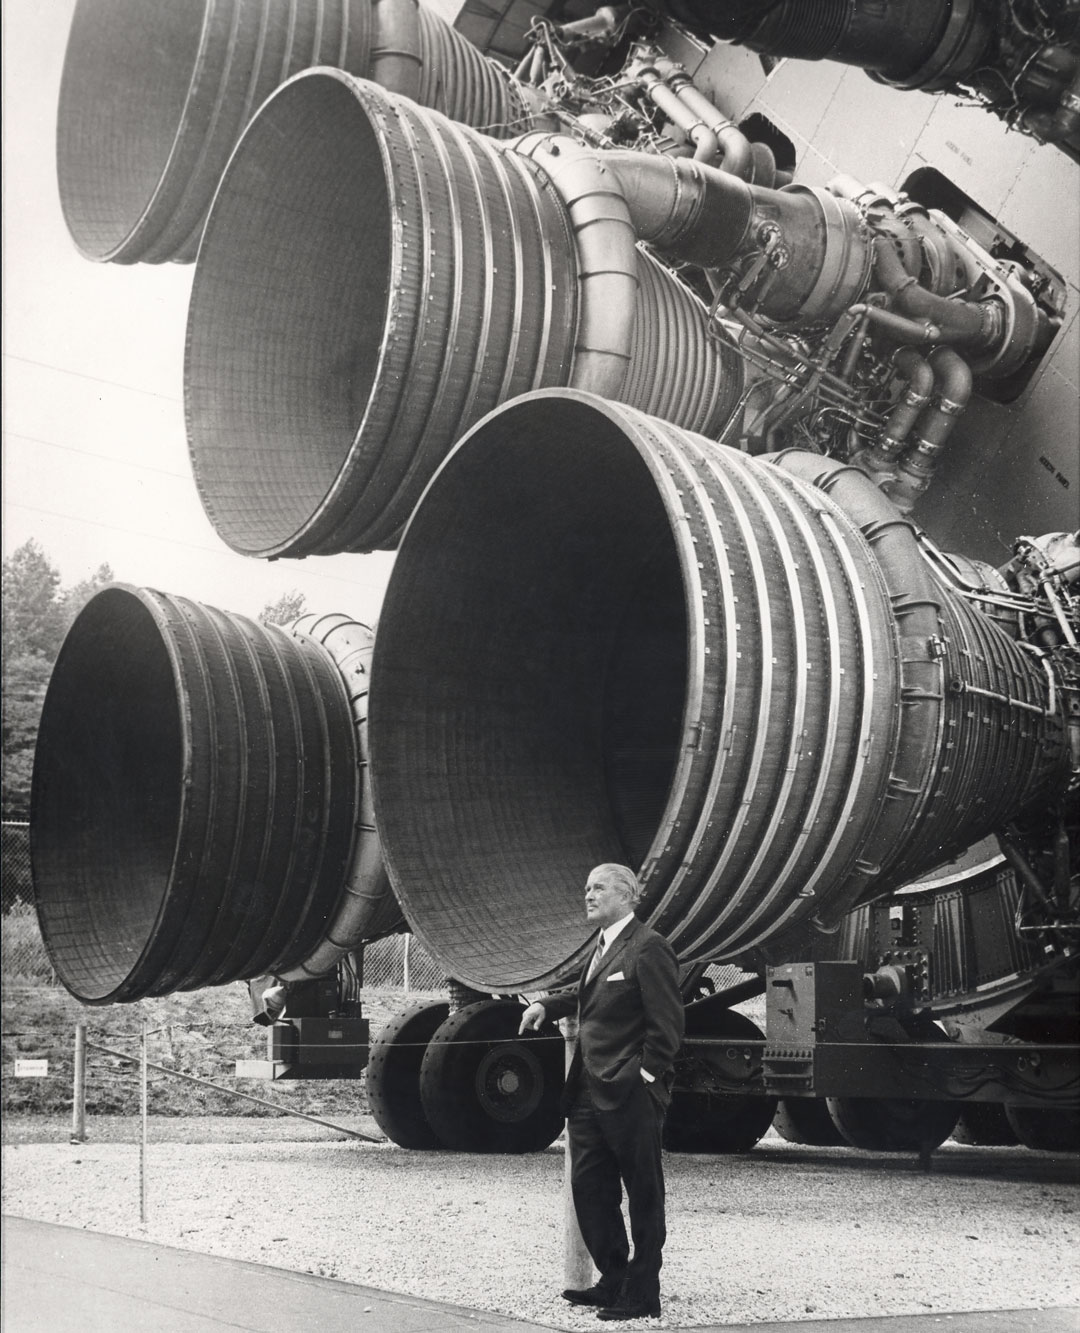 Wernher von Braun in front of F-1 engines for the first stage of a Saturn V rocket, US Space and Rocket Center, Huntsville, Alabama, 1959. From Sun and Moon